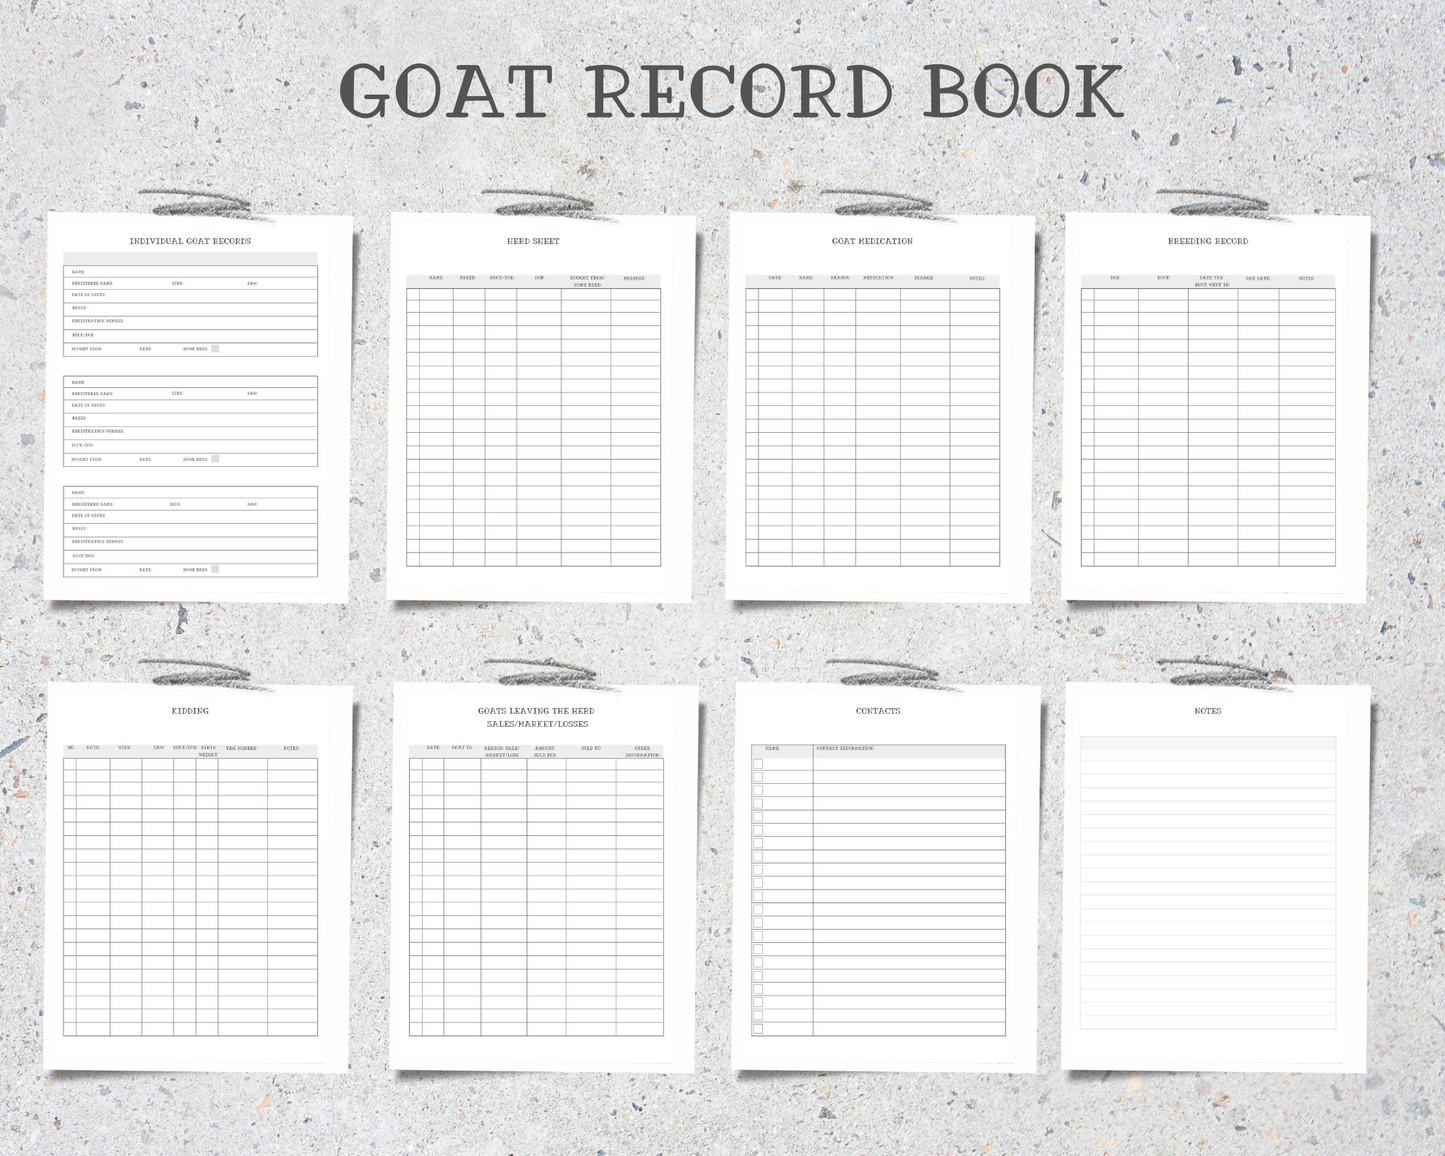 Goat Record Keeping Book Floral Design